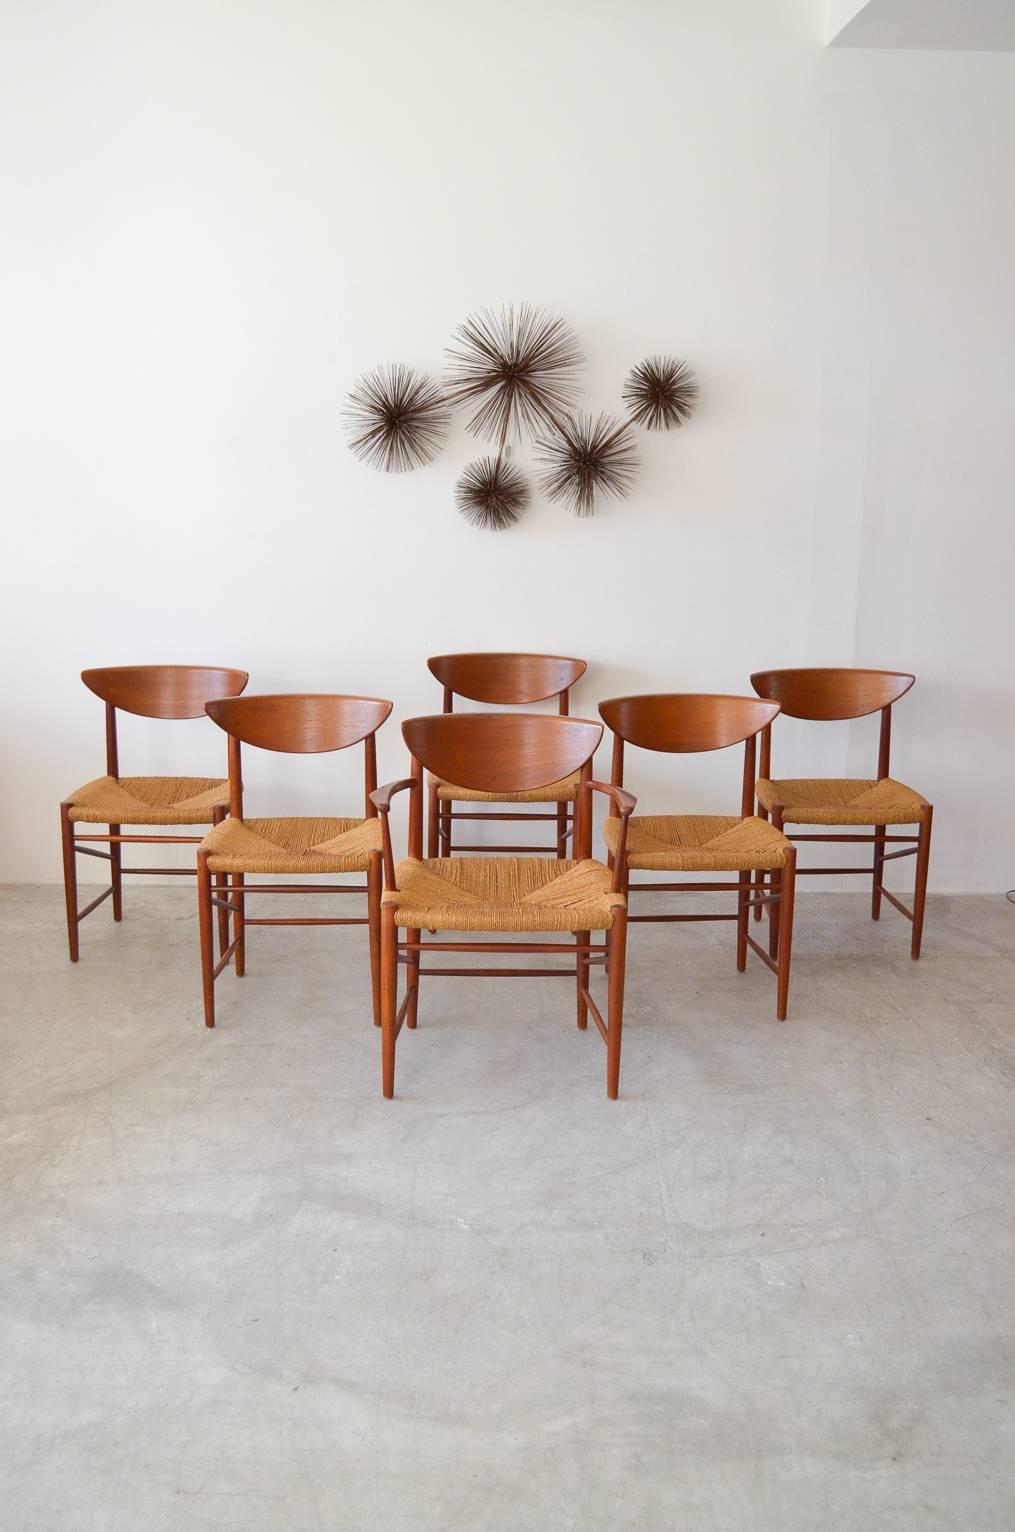 Original set of six dining chairs includes five side and one Captains chair, model 316 by Peter Hvidt & Orla Mølgaard Nielsen. Original paper cord woven seats in good condition. Sculpted teak backrests with exposed joinery. Classic and beautiful